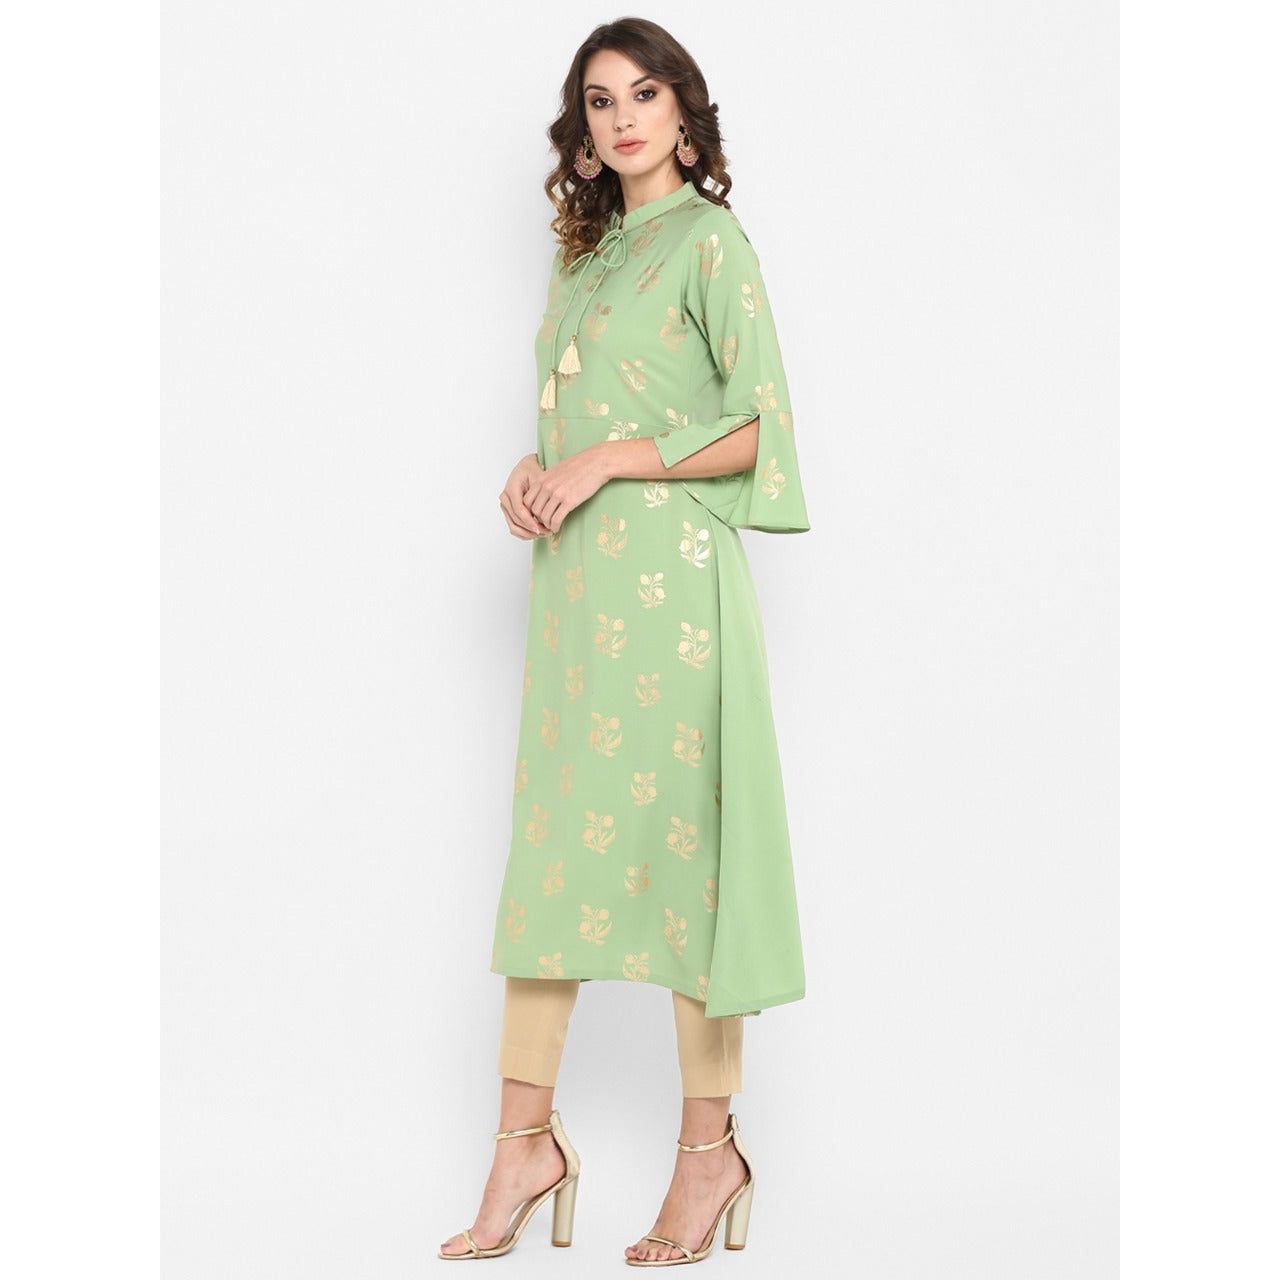 Light Green Poly Crepe with Gold Prints Kurrta/Tunic top for Women